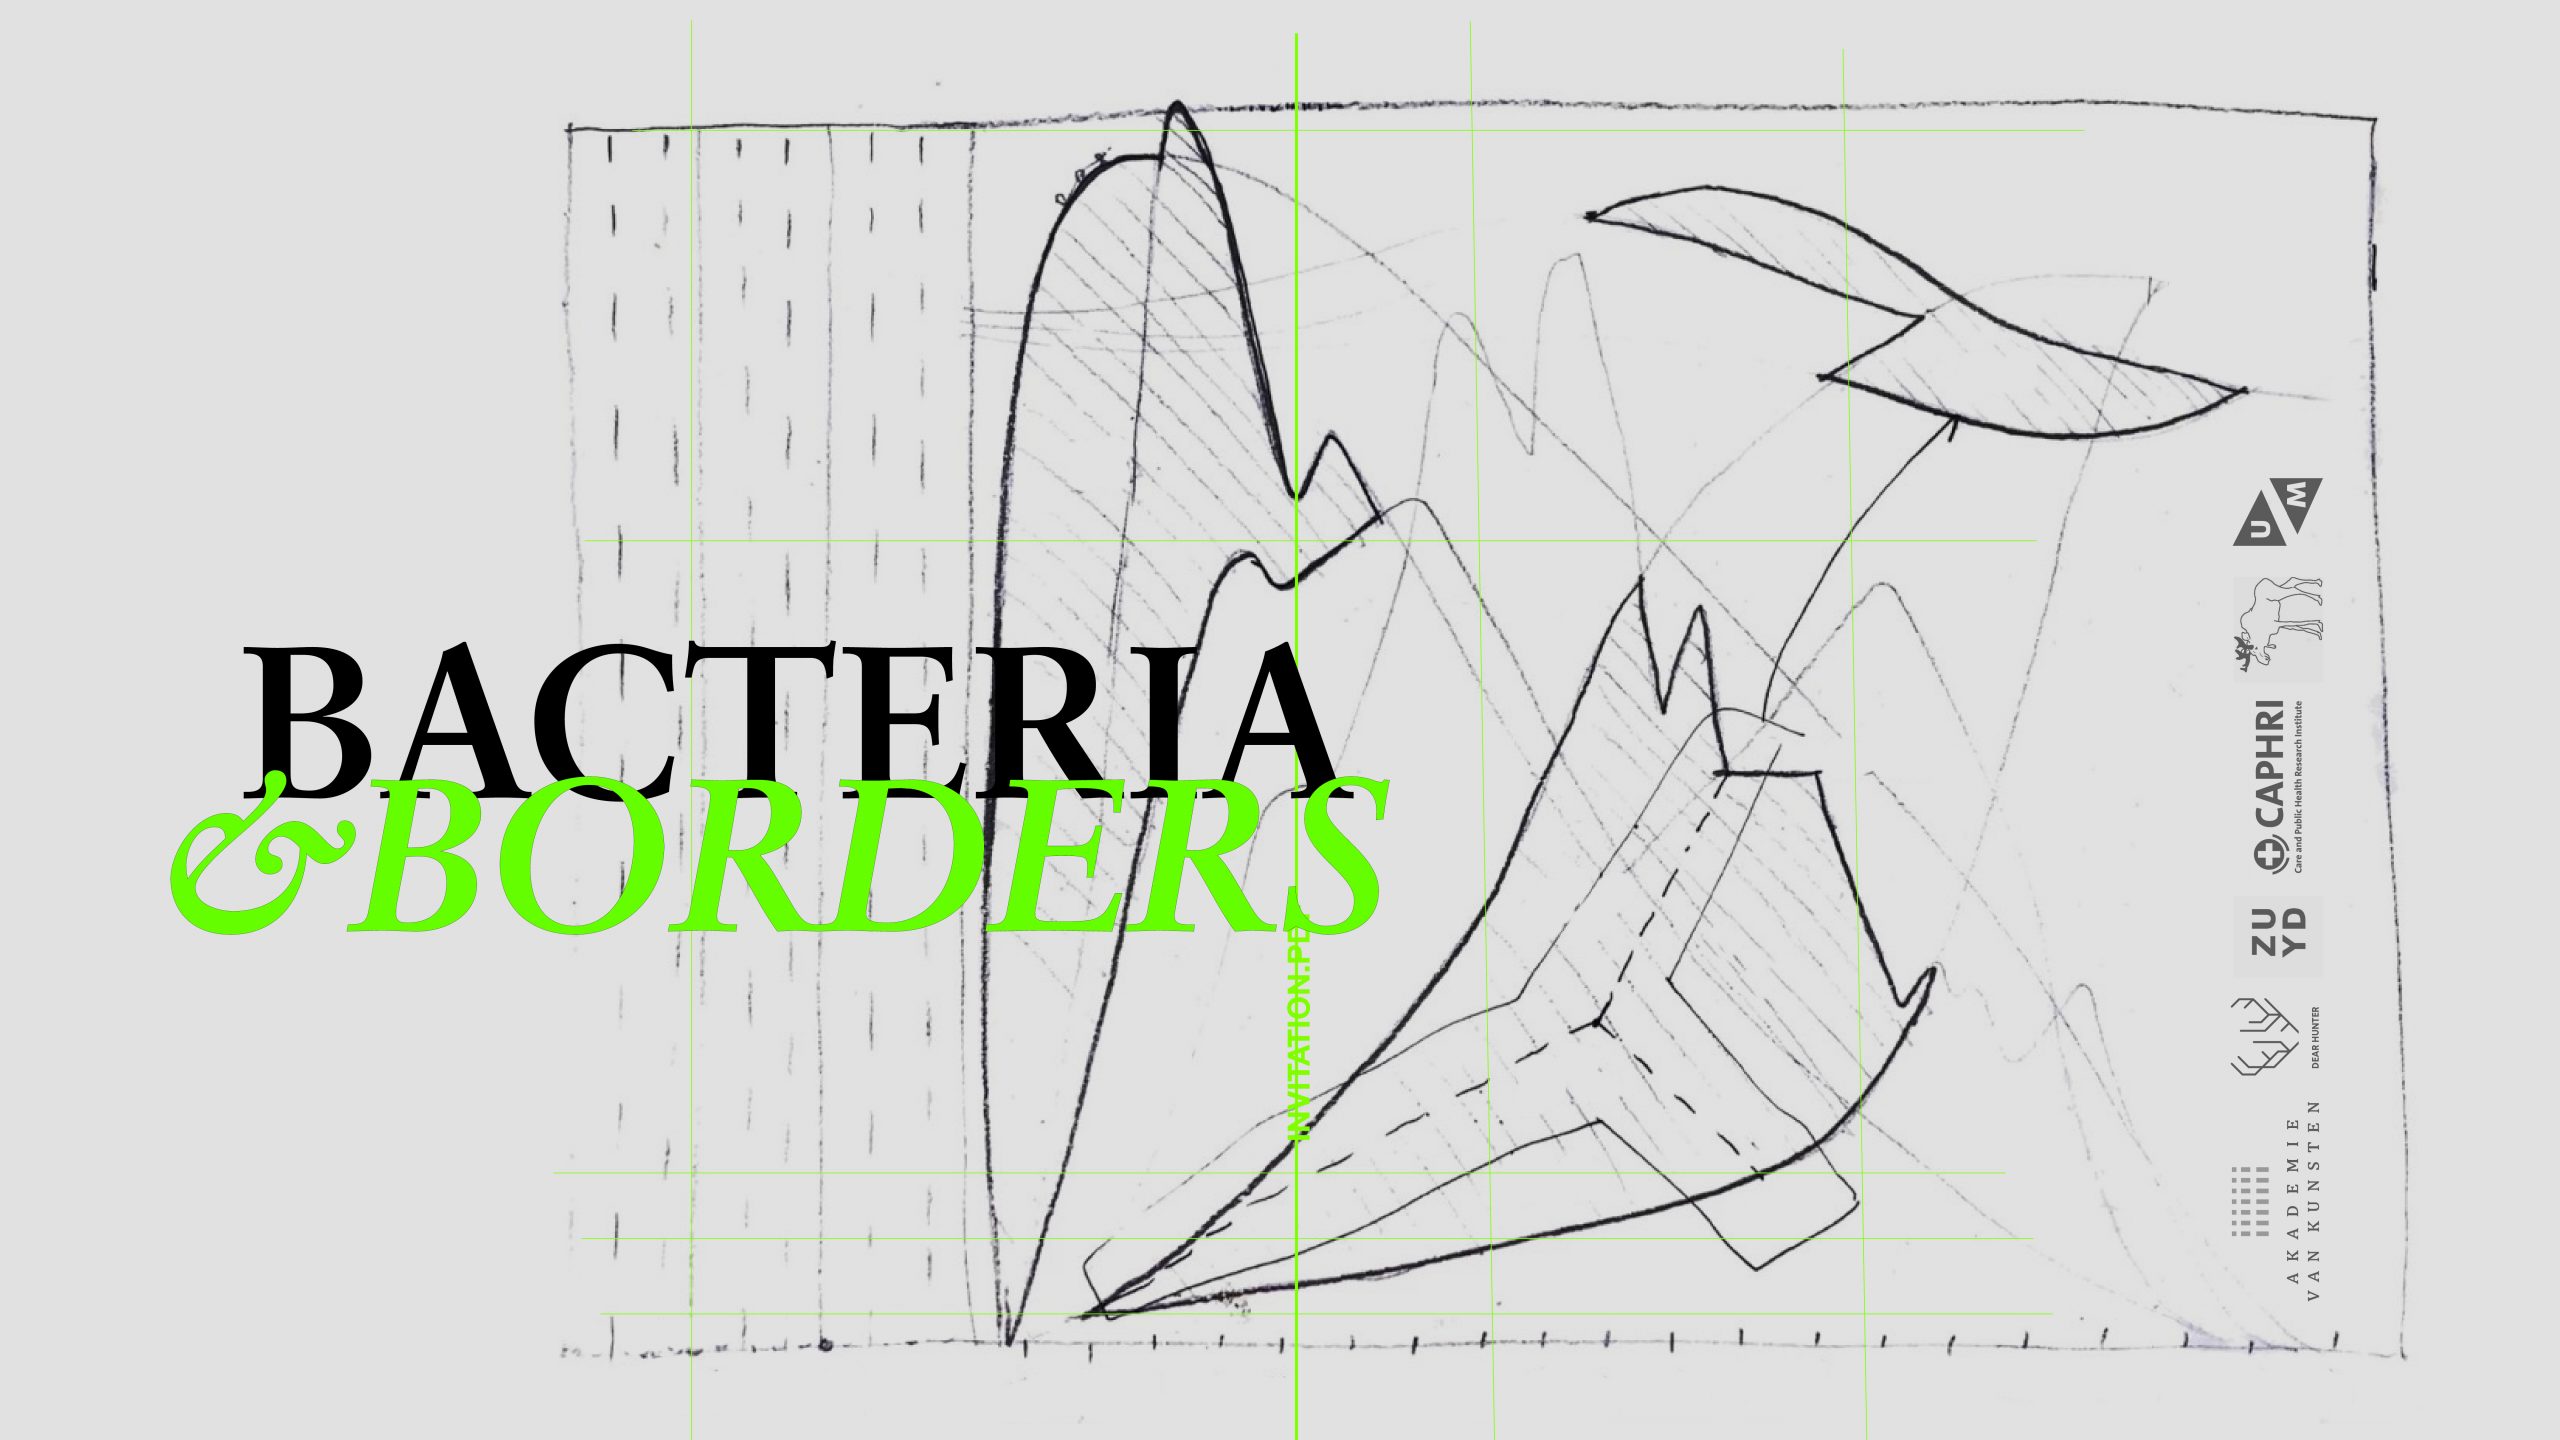 Presentation artistic research on the impact of borders on bacteria and virusses